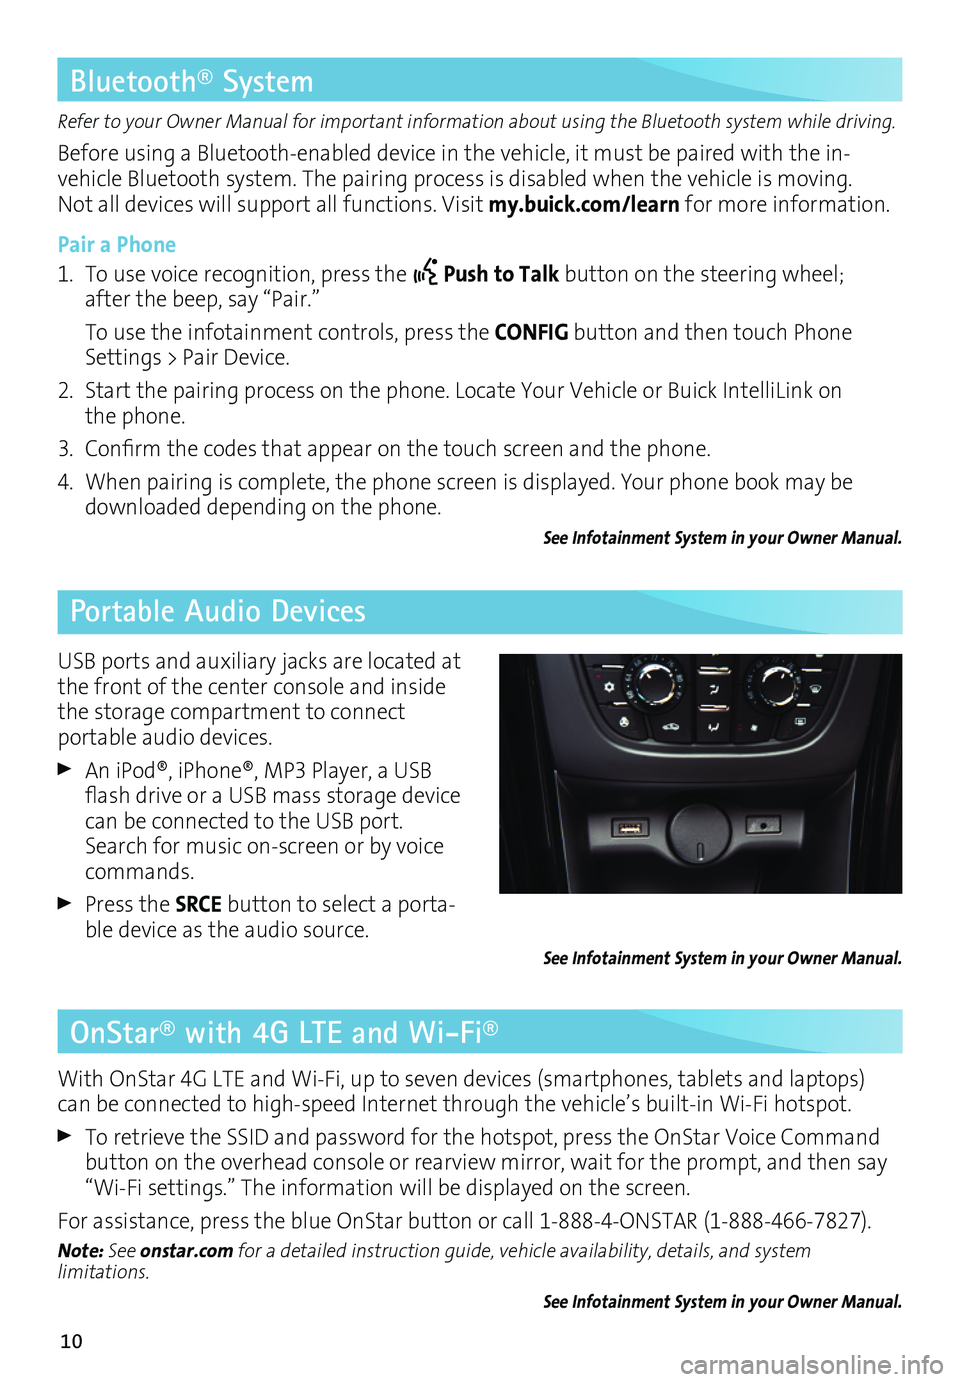 BUICK CASCADA 2017  Get To Know Guide 10
OnStar® with 4G LTE and Wi-Fi®
Refer to your Owner Manual for important information about using the Bluetooth system while driving.
Before using a Bluetooth-enabled device in the vehicle, it must